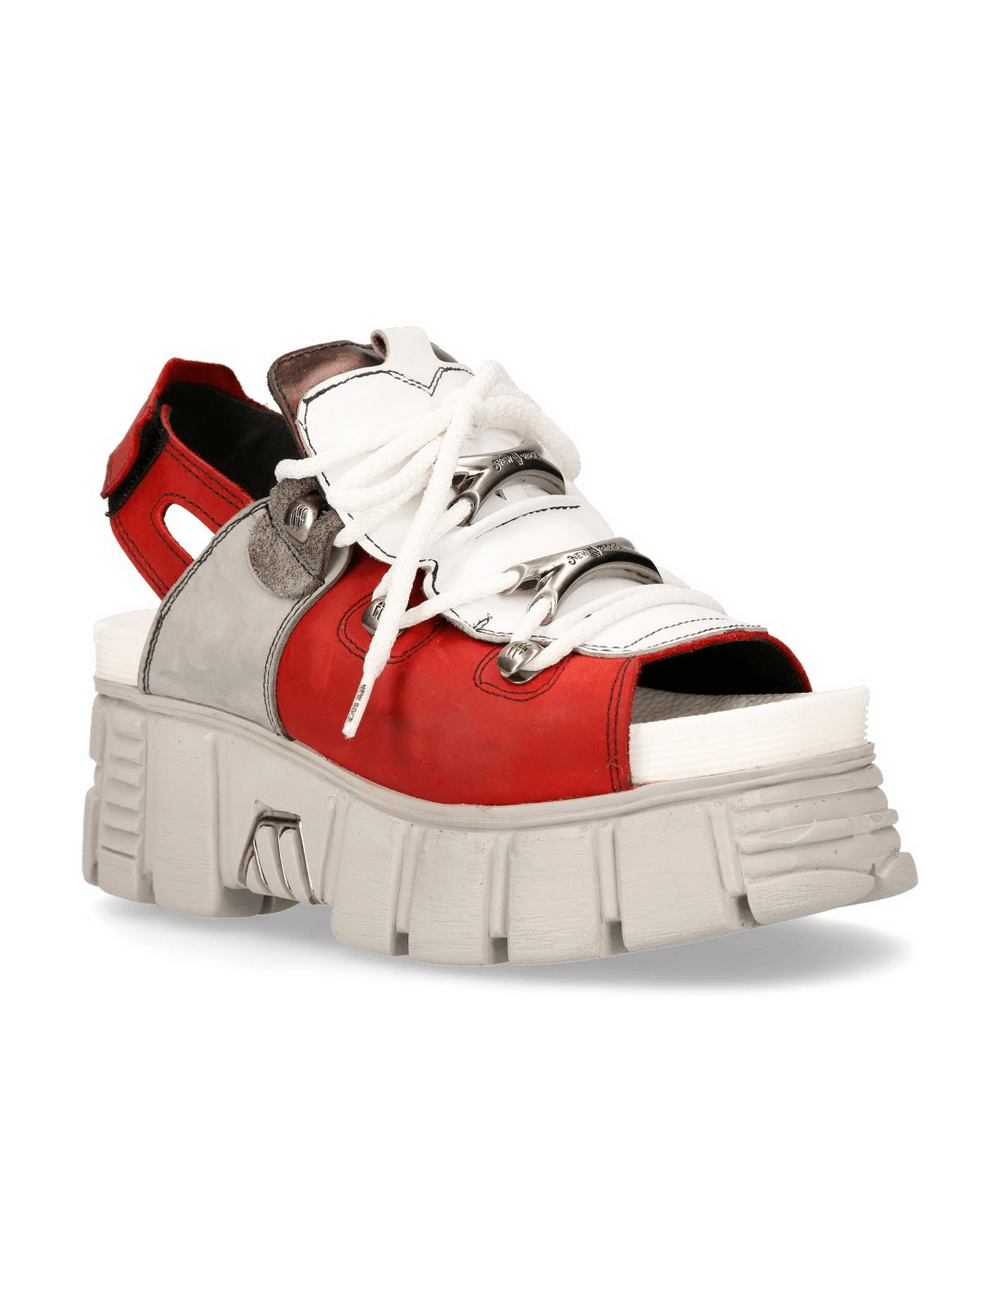 NEW ROCK Red and Gray Chunky Sole Rock Sandals